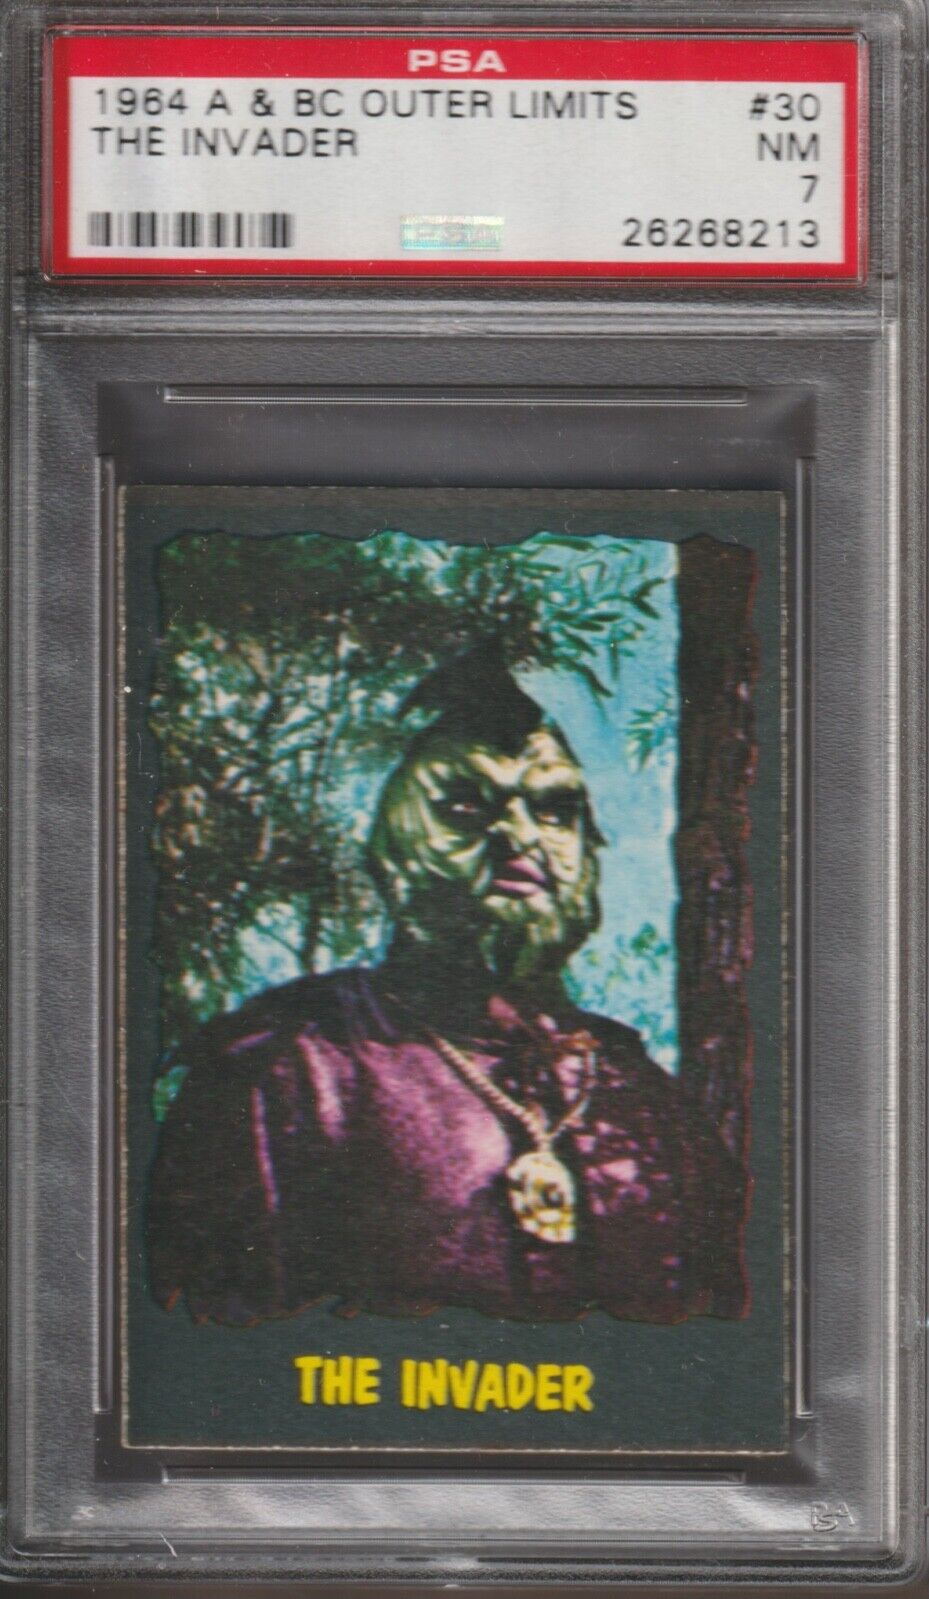 1964 OUTER LIMITS TRADING CARD #30 - A & BC ENGLAND - PSA 7 - THE INVADER